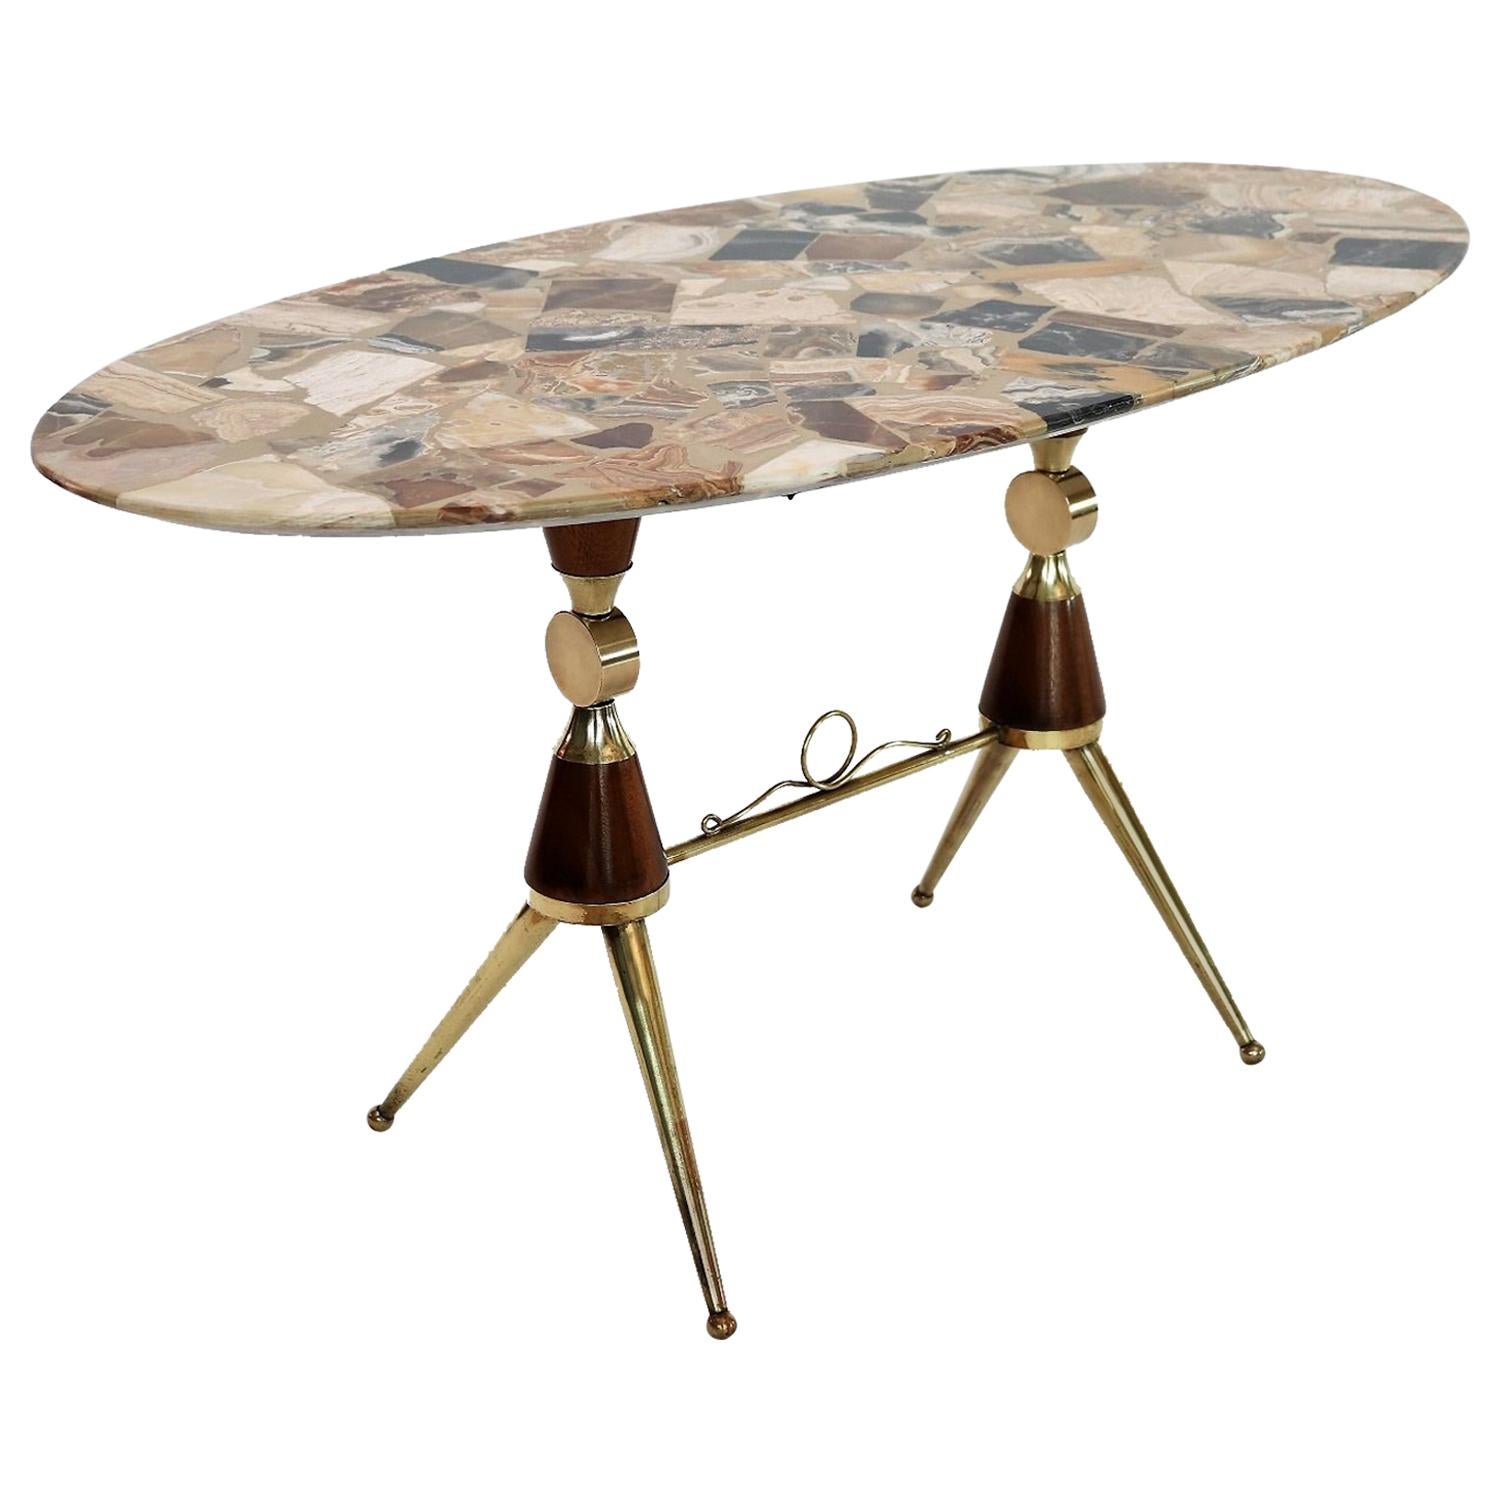 Italian Midcentury Coffee Table with Marble Mosaic, Brass and Mahogany, 1950s